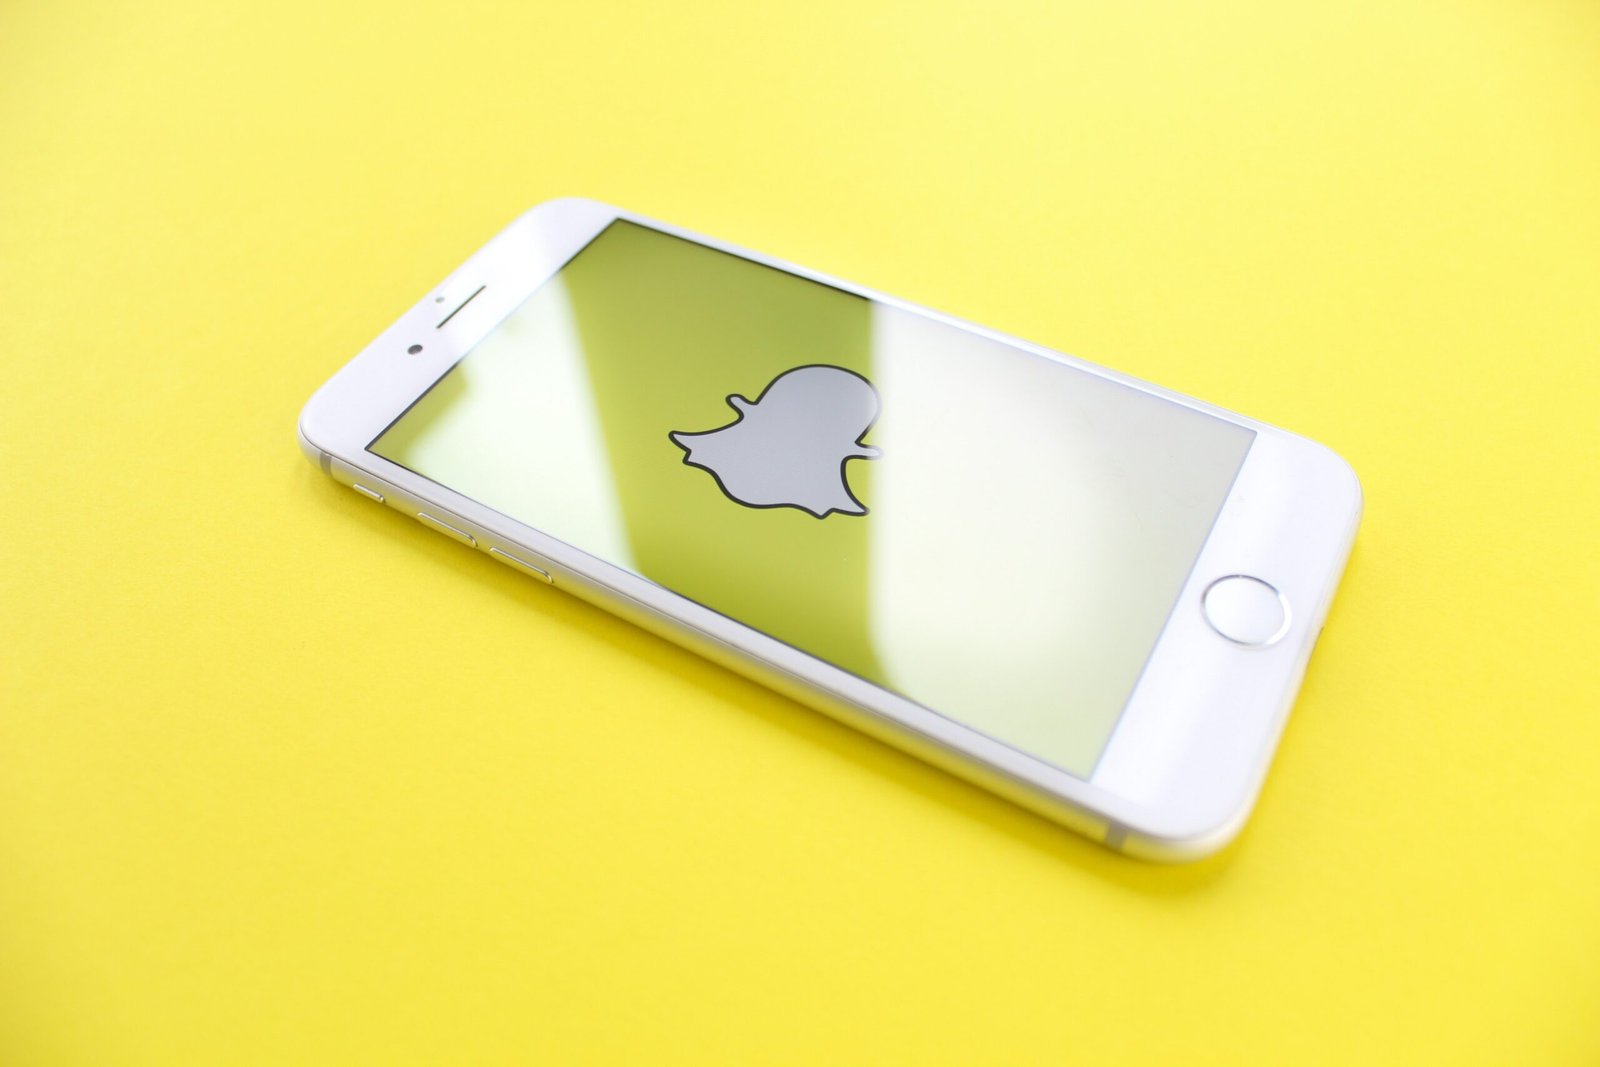 Does Downloading Snapchat Data Show Messages?